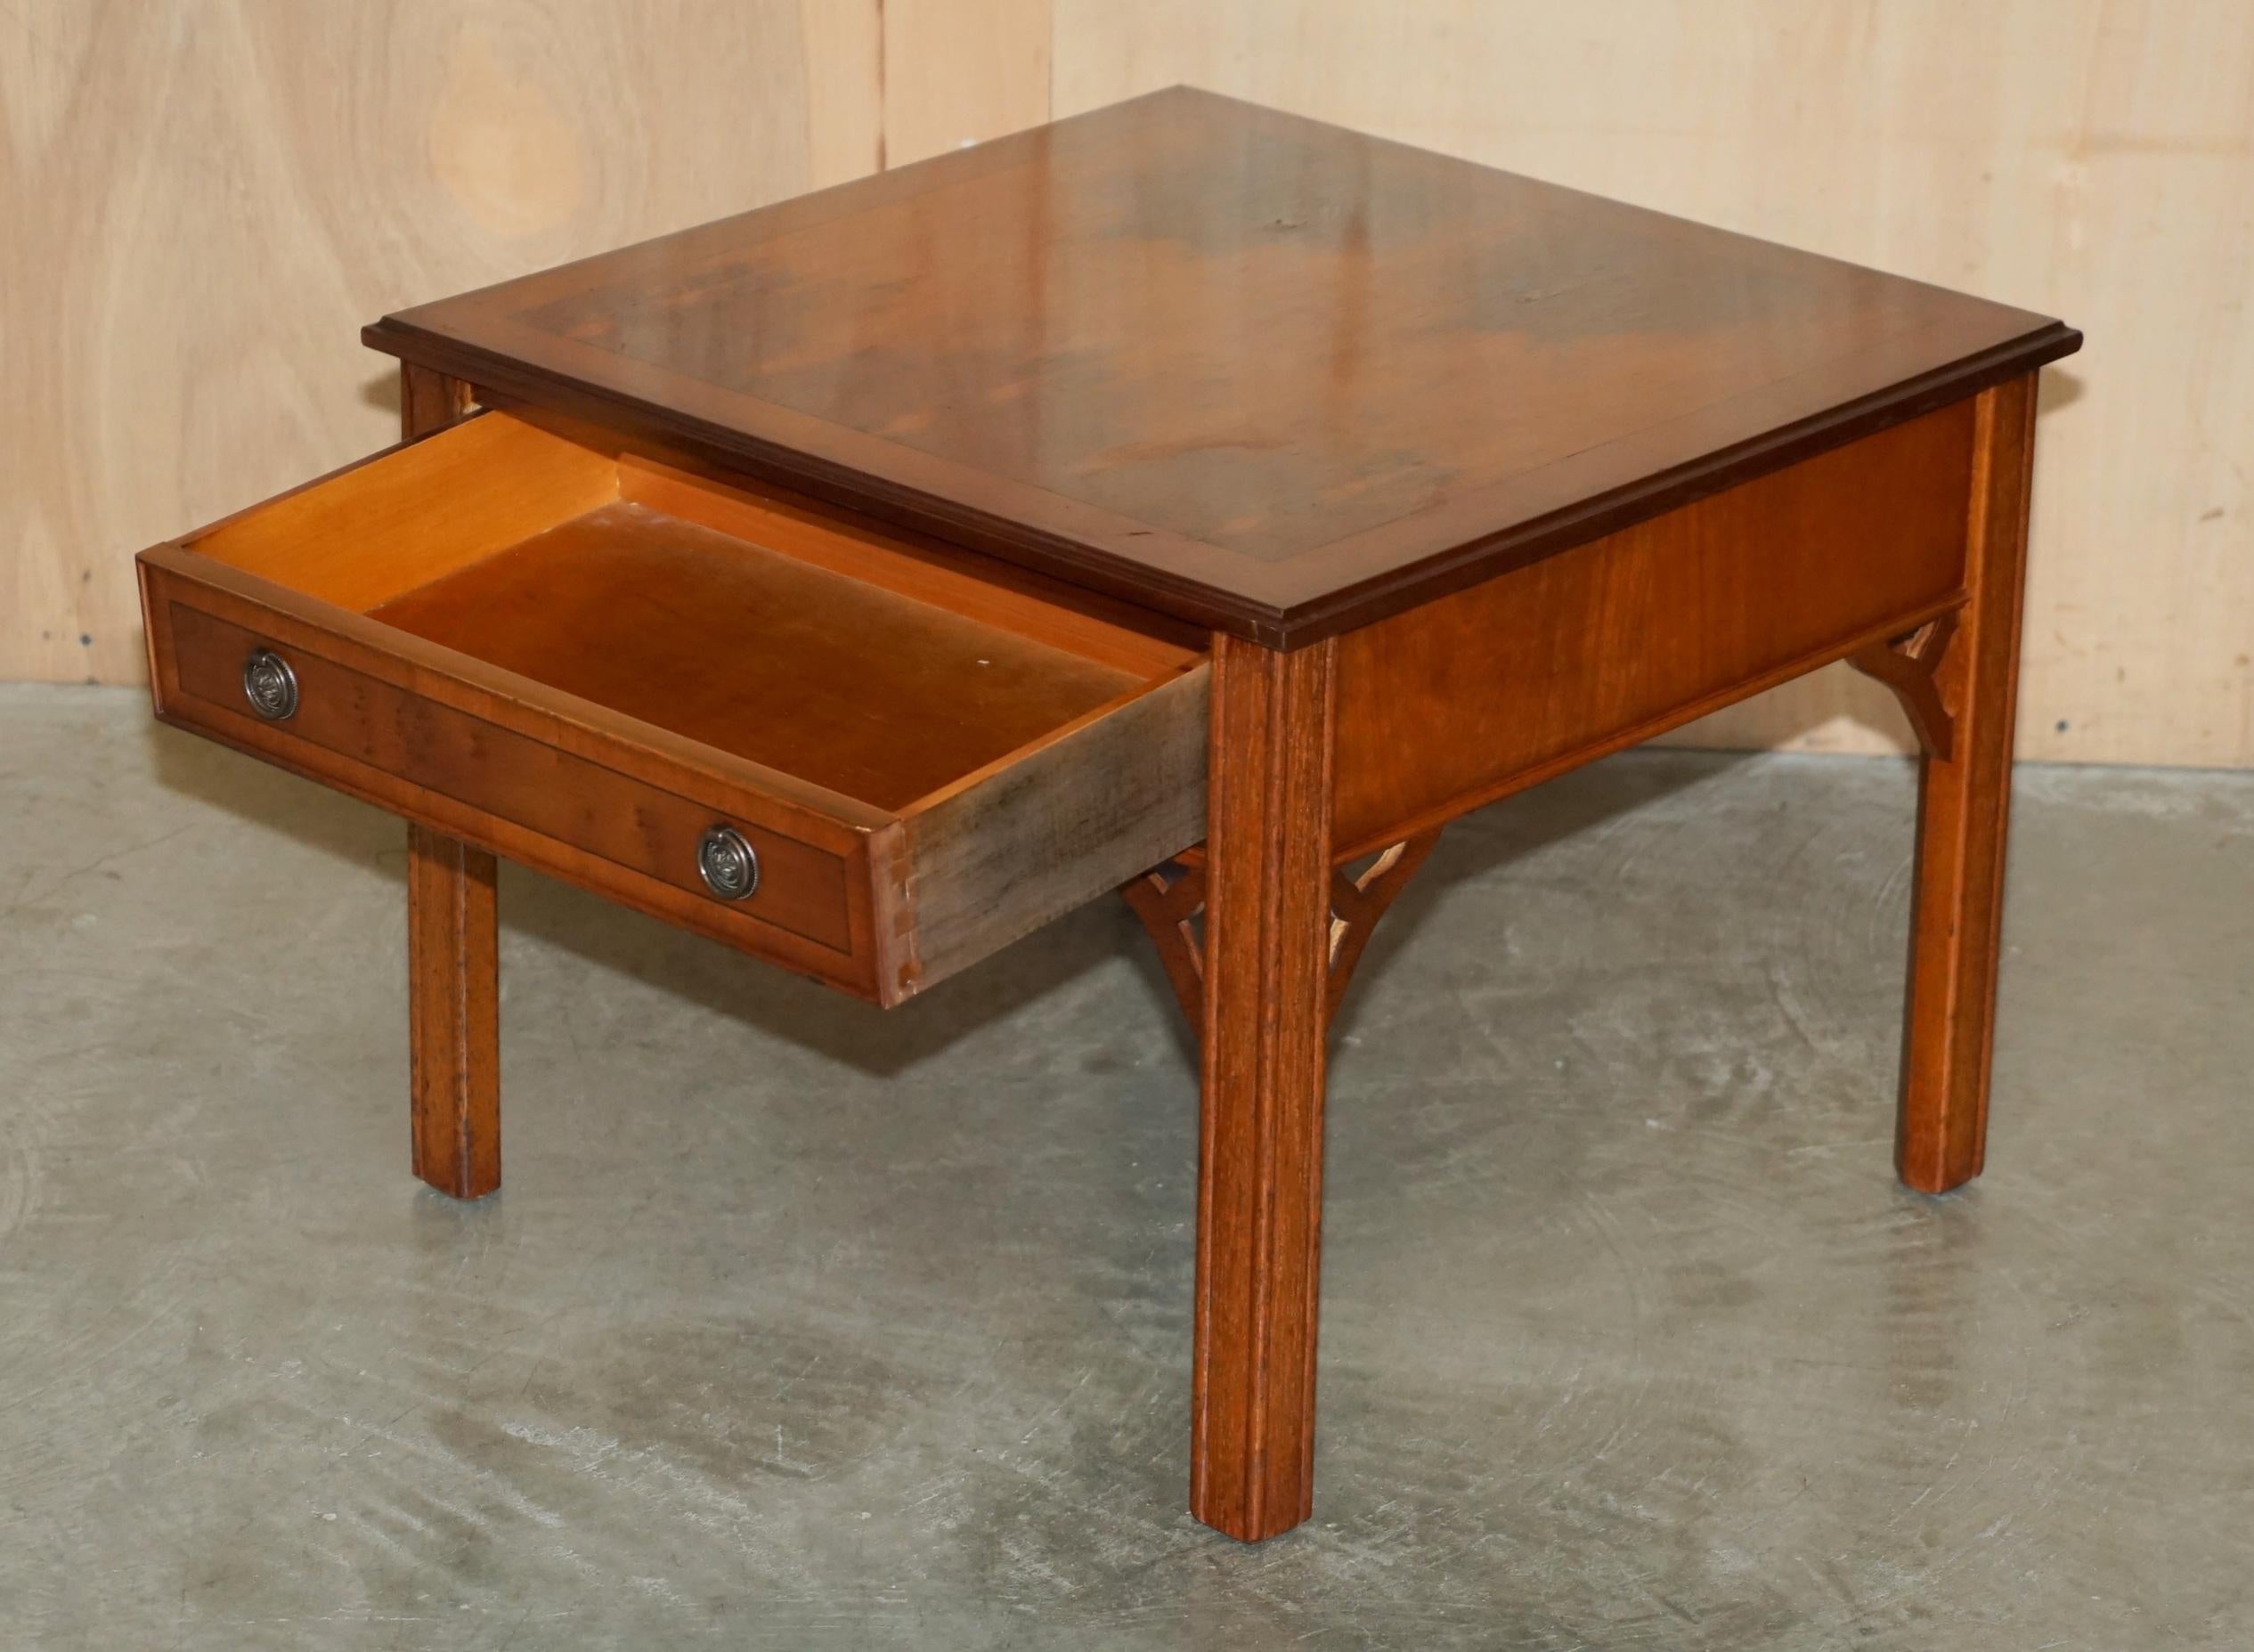 LOVELY PAIR OF BURR YEW WOOD SiDE END LAMP WINE TABLES MIT LARGE SINGLE DRAWERS im Angebot 5